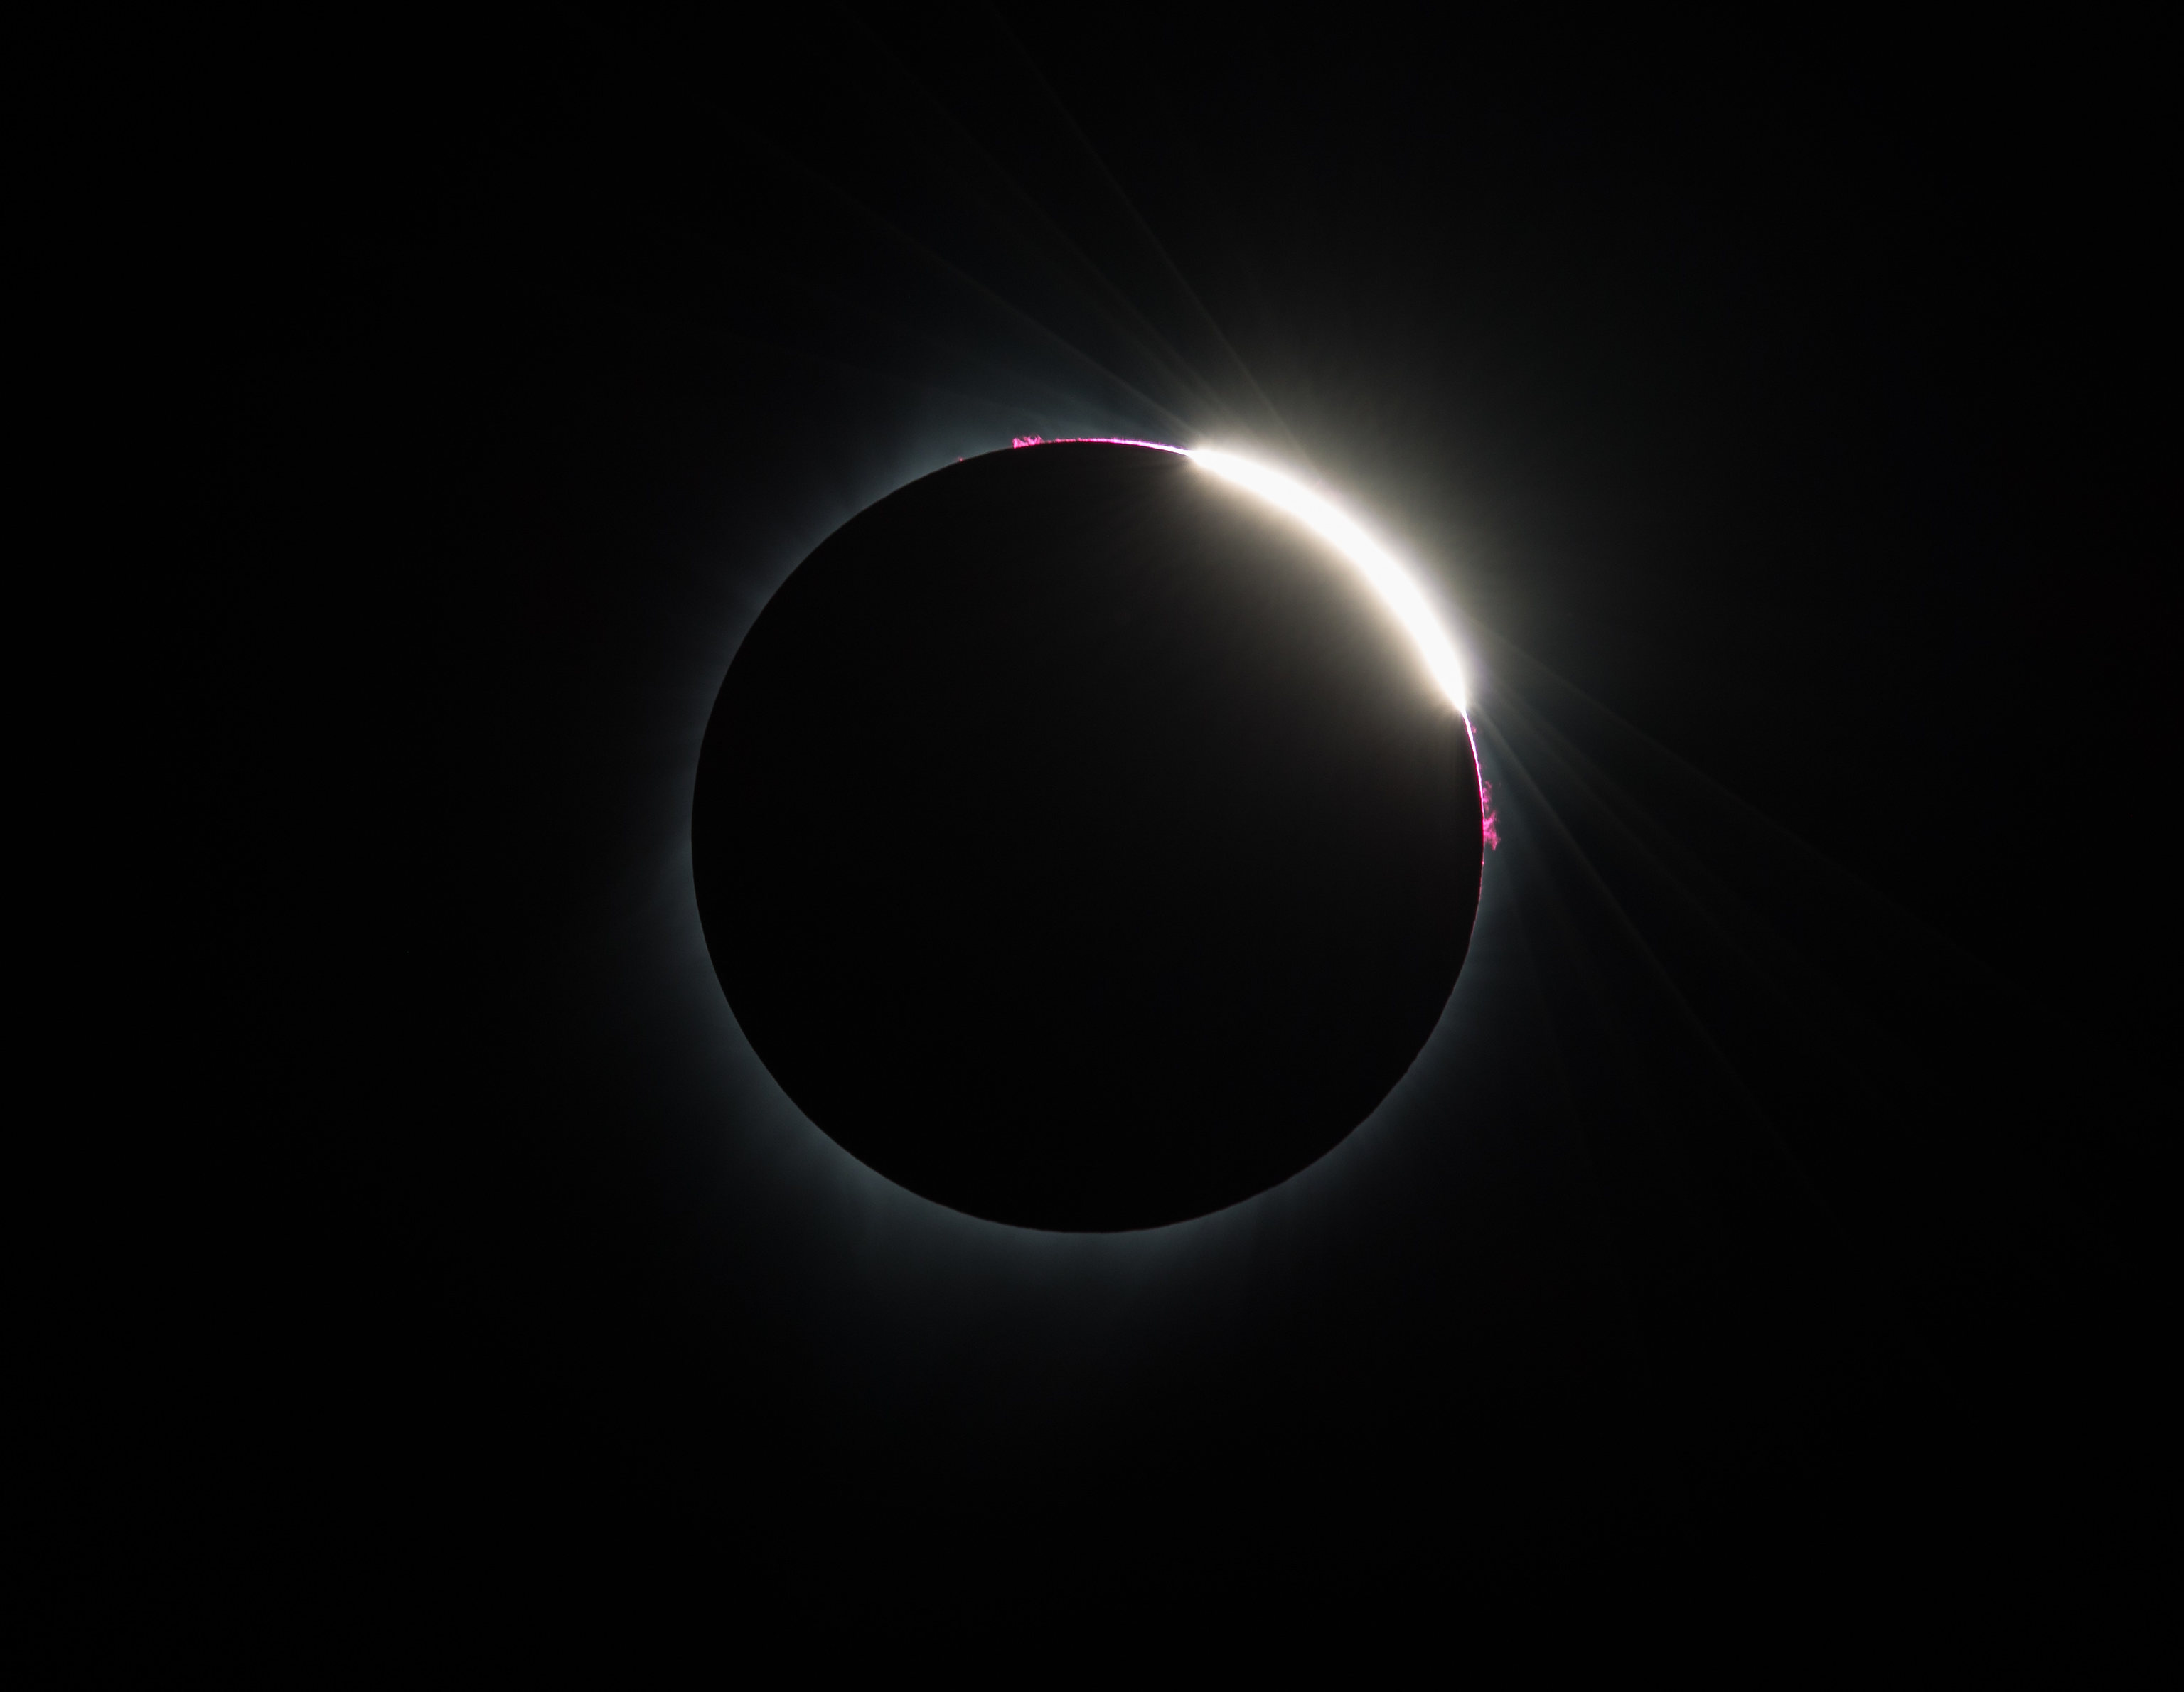 Against a black background is a solar eclipse. There is a large black circle in the middle of the image - the Sun. On the top right of the circle is a bright white sliver of light from the Sun. On either side of the sliver of light are small spots of pink looping away from the circle - prominences.